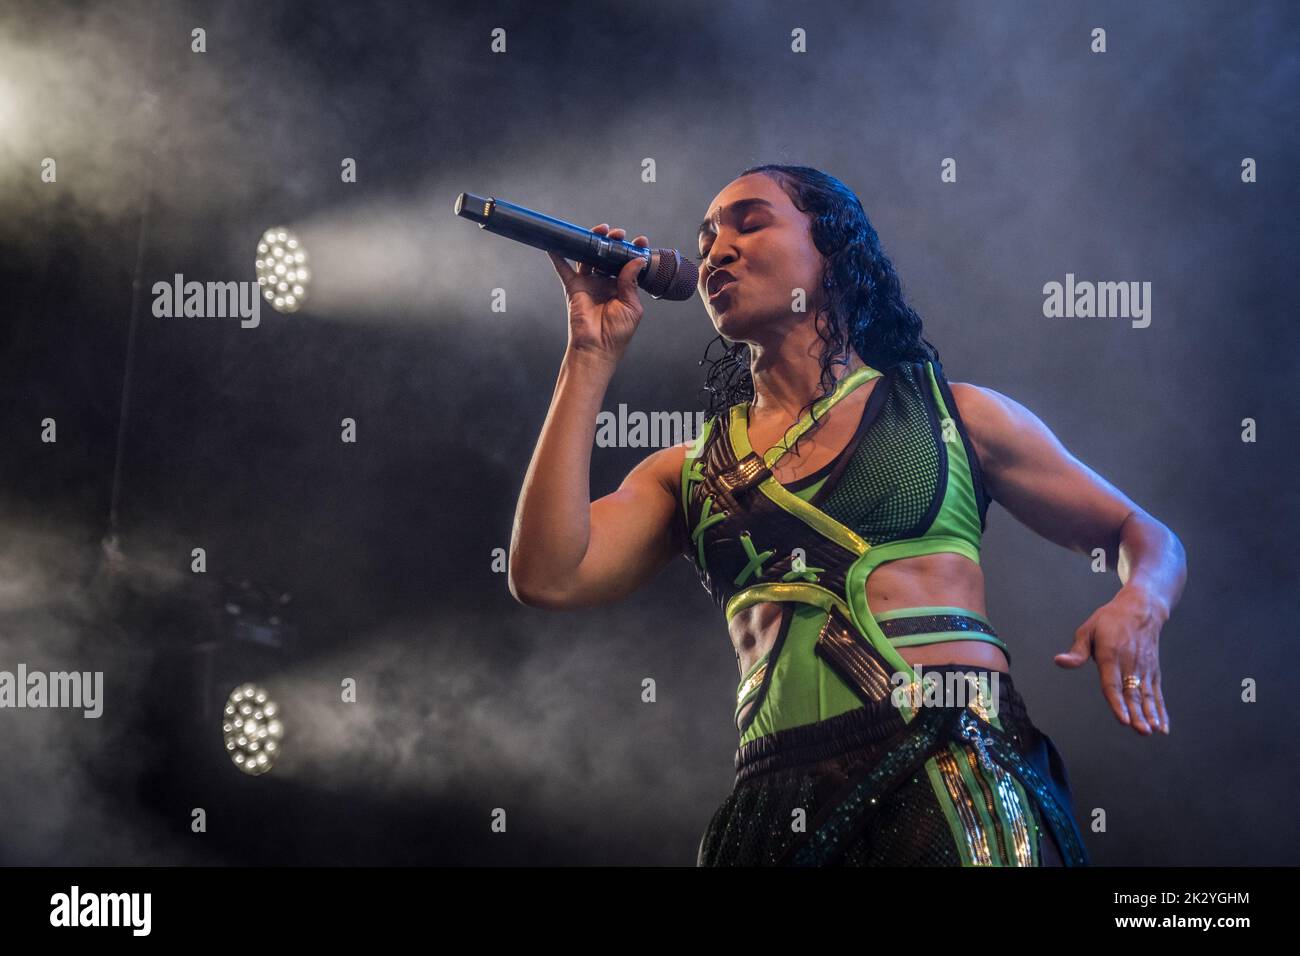 Roskilde, Denmark. 30th, June 2022. The American R&B group TLC performs a live concert during the Danish music festival Roskilde Festival 2022 in Roskilde. Here singer T-Boz is seen live on stage. Here singer Chilli is seen live on stage. (Photo credit: Gonzales Photo - Thomas Rasmussen). Stock Photo